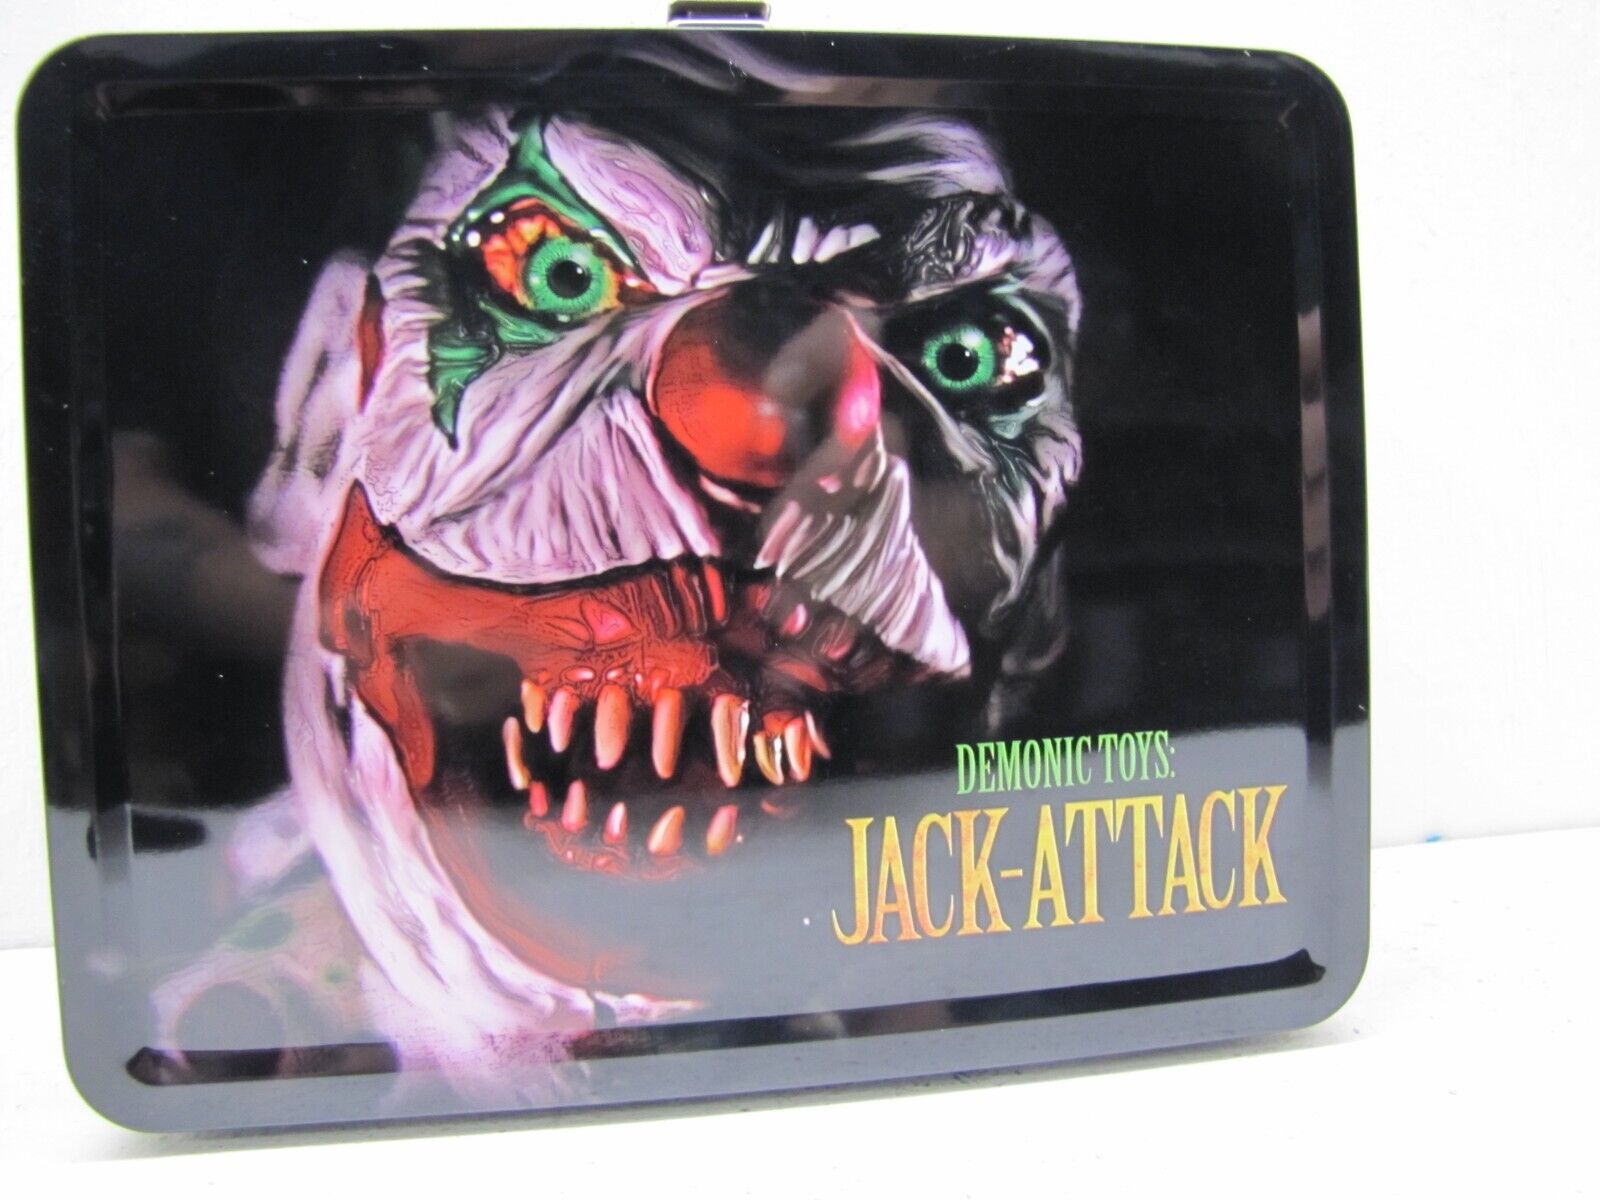 Jack Attack--Demonic Toys-( Full Moon )   METAL LUNCHBOX No Thermos Brand new